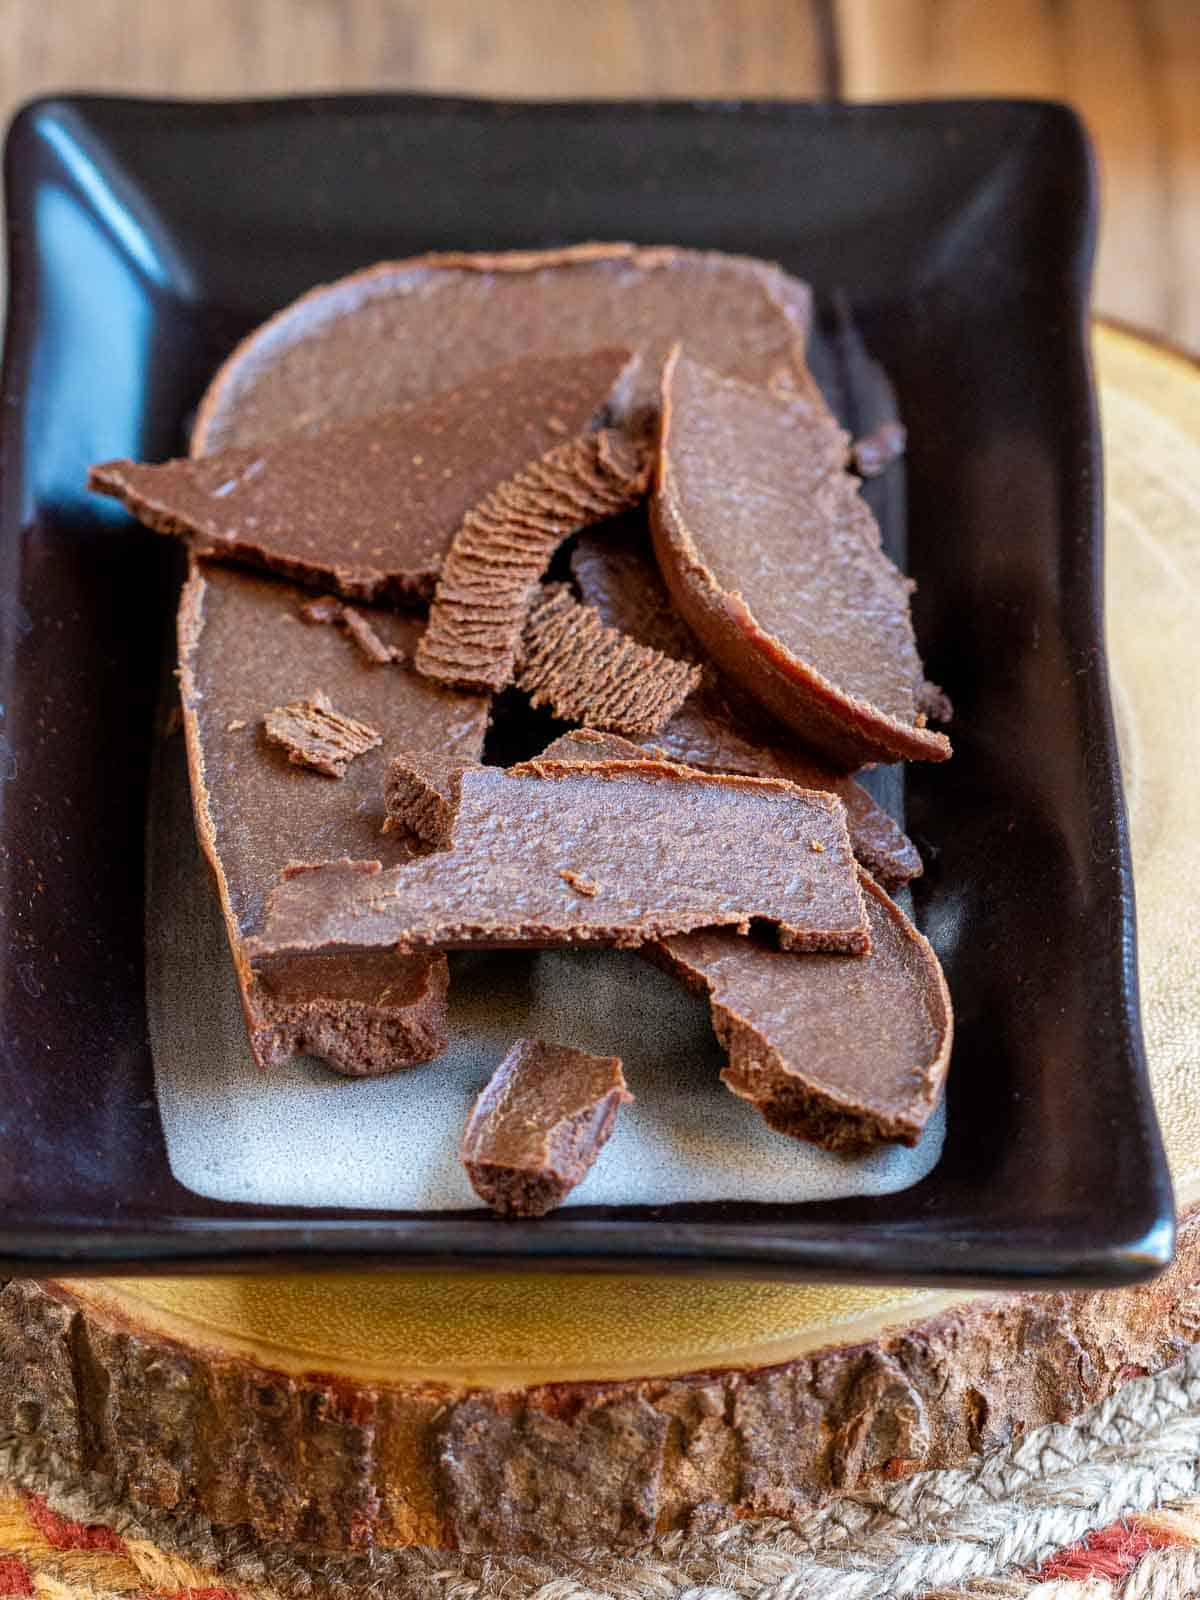 Easy 3 ingredient vegan chocolate on a brown and white plate.